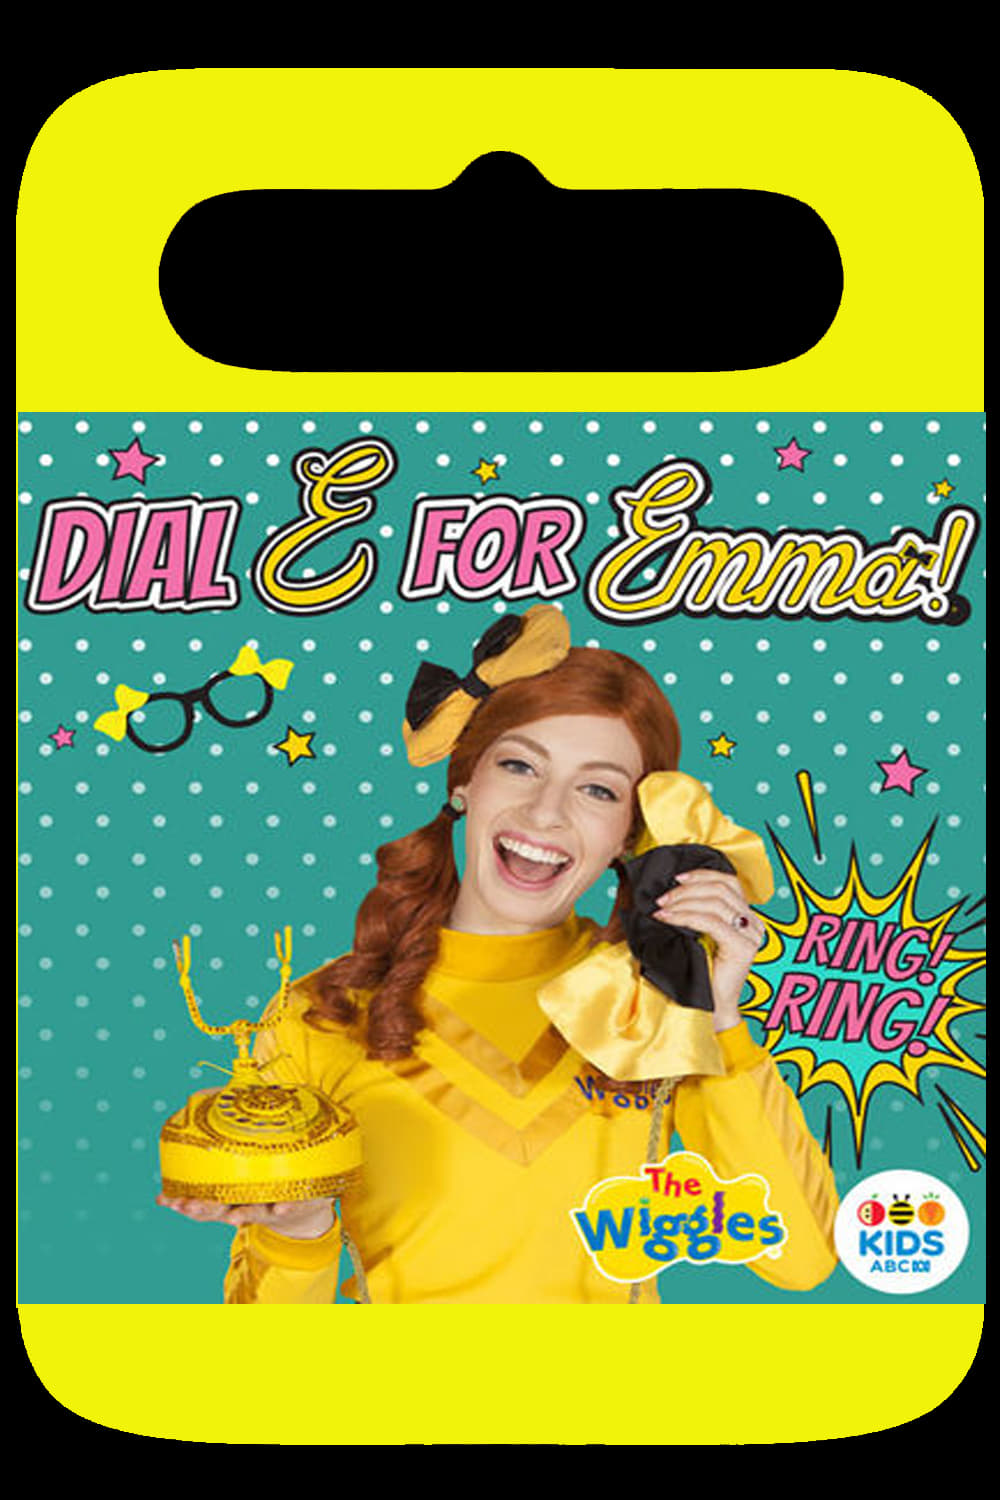 The Wiggles - Dial E For Emma